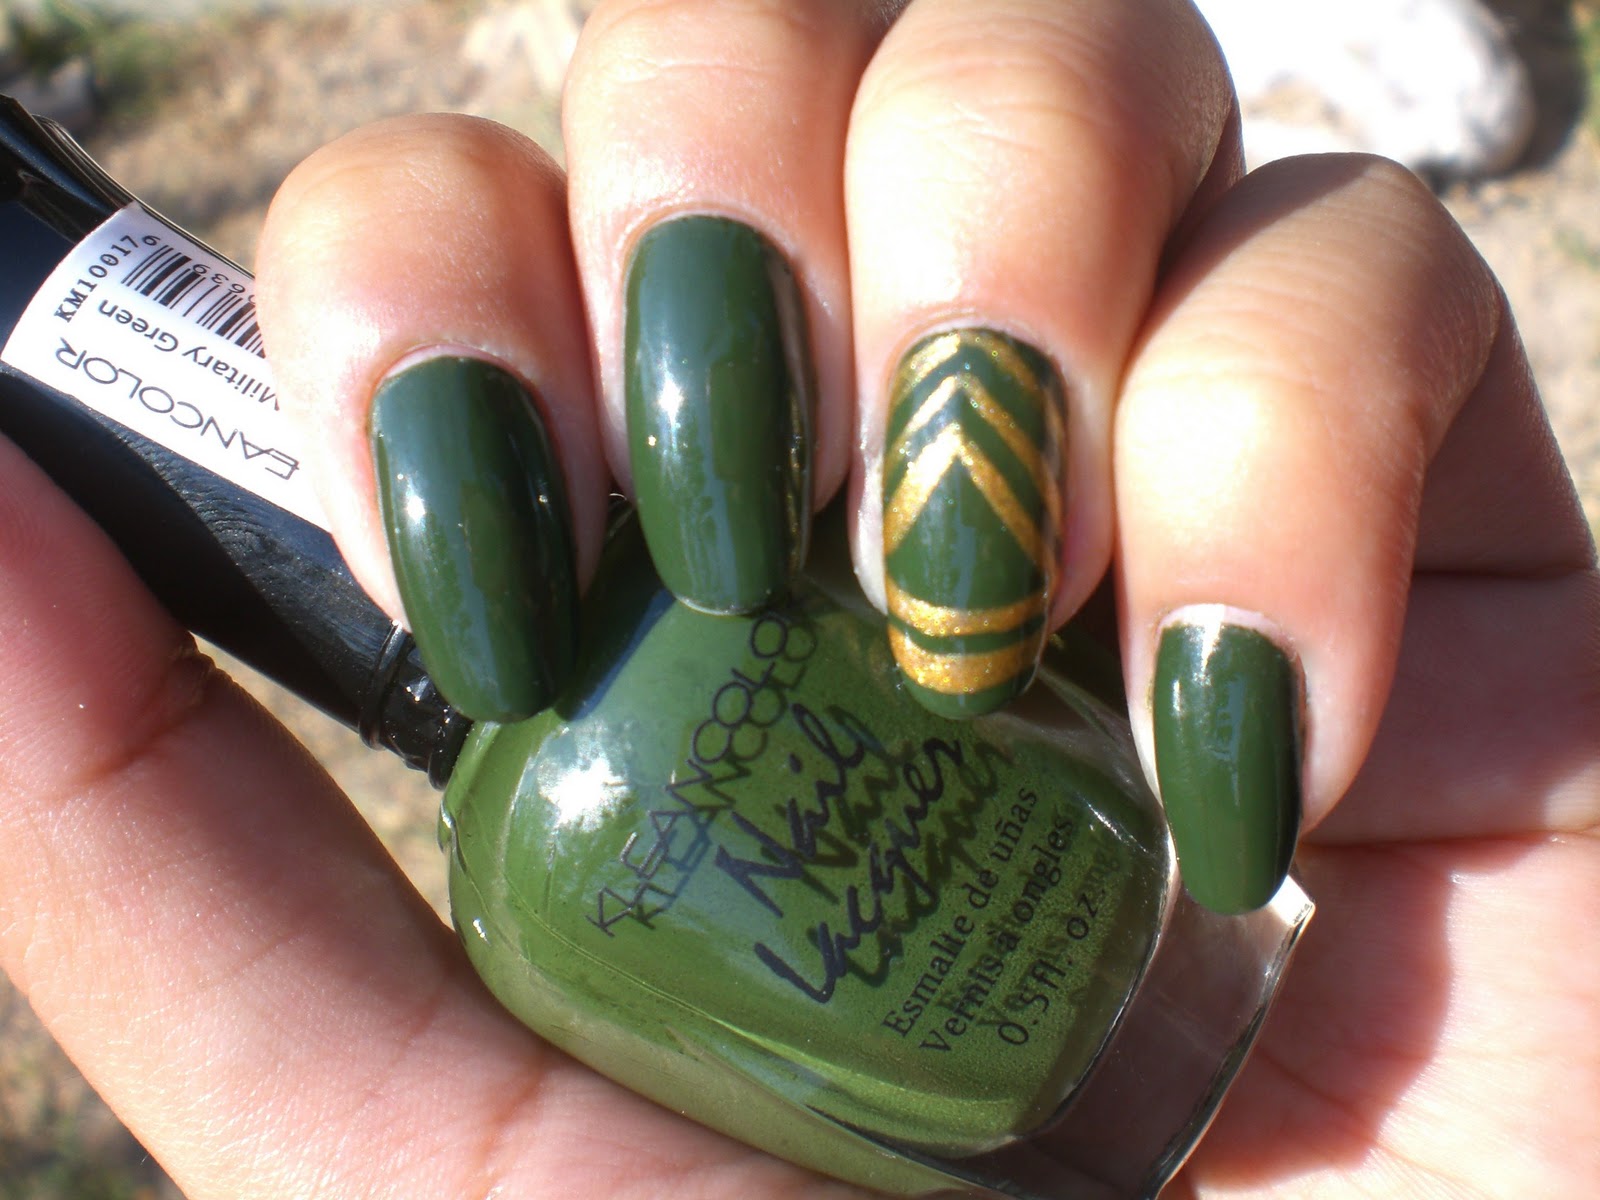 Authorized Nail Colors for Army Soldiers - wide 10